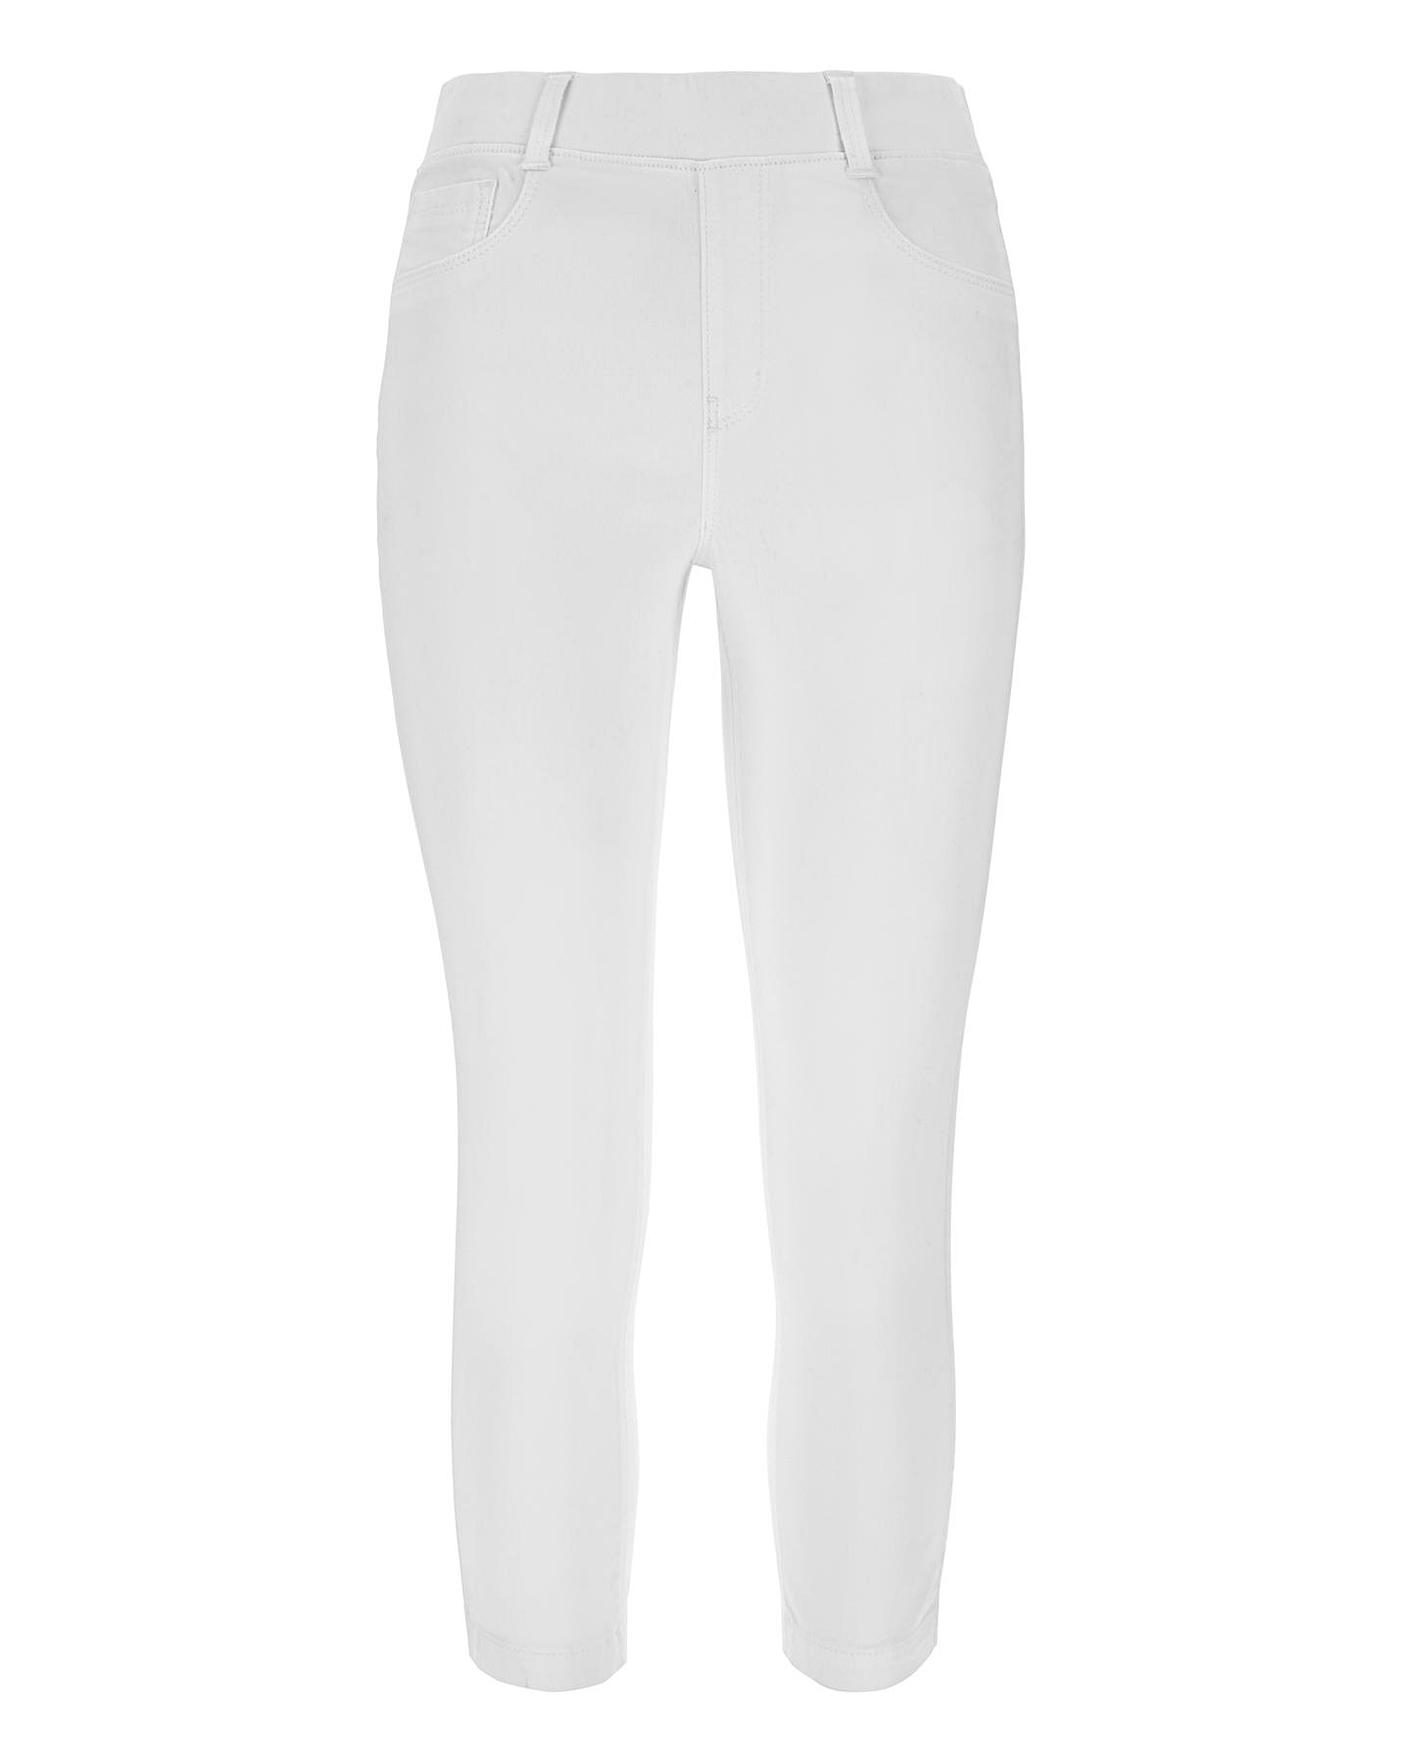 white cropped jeggings